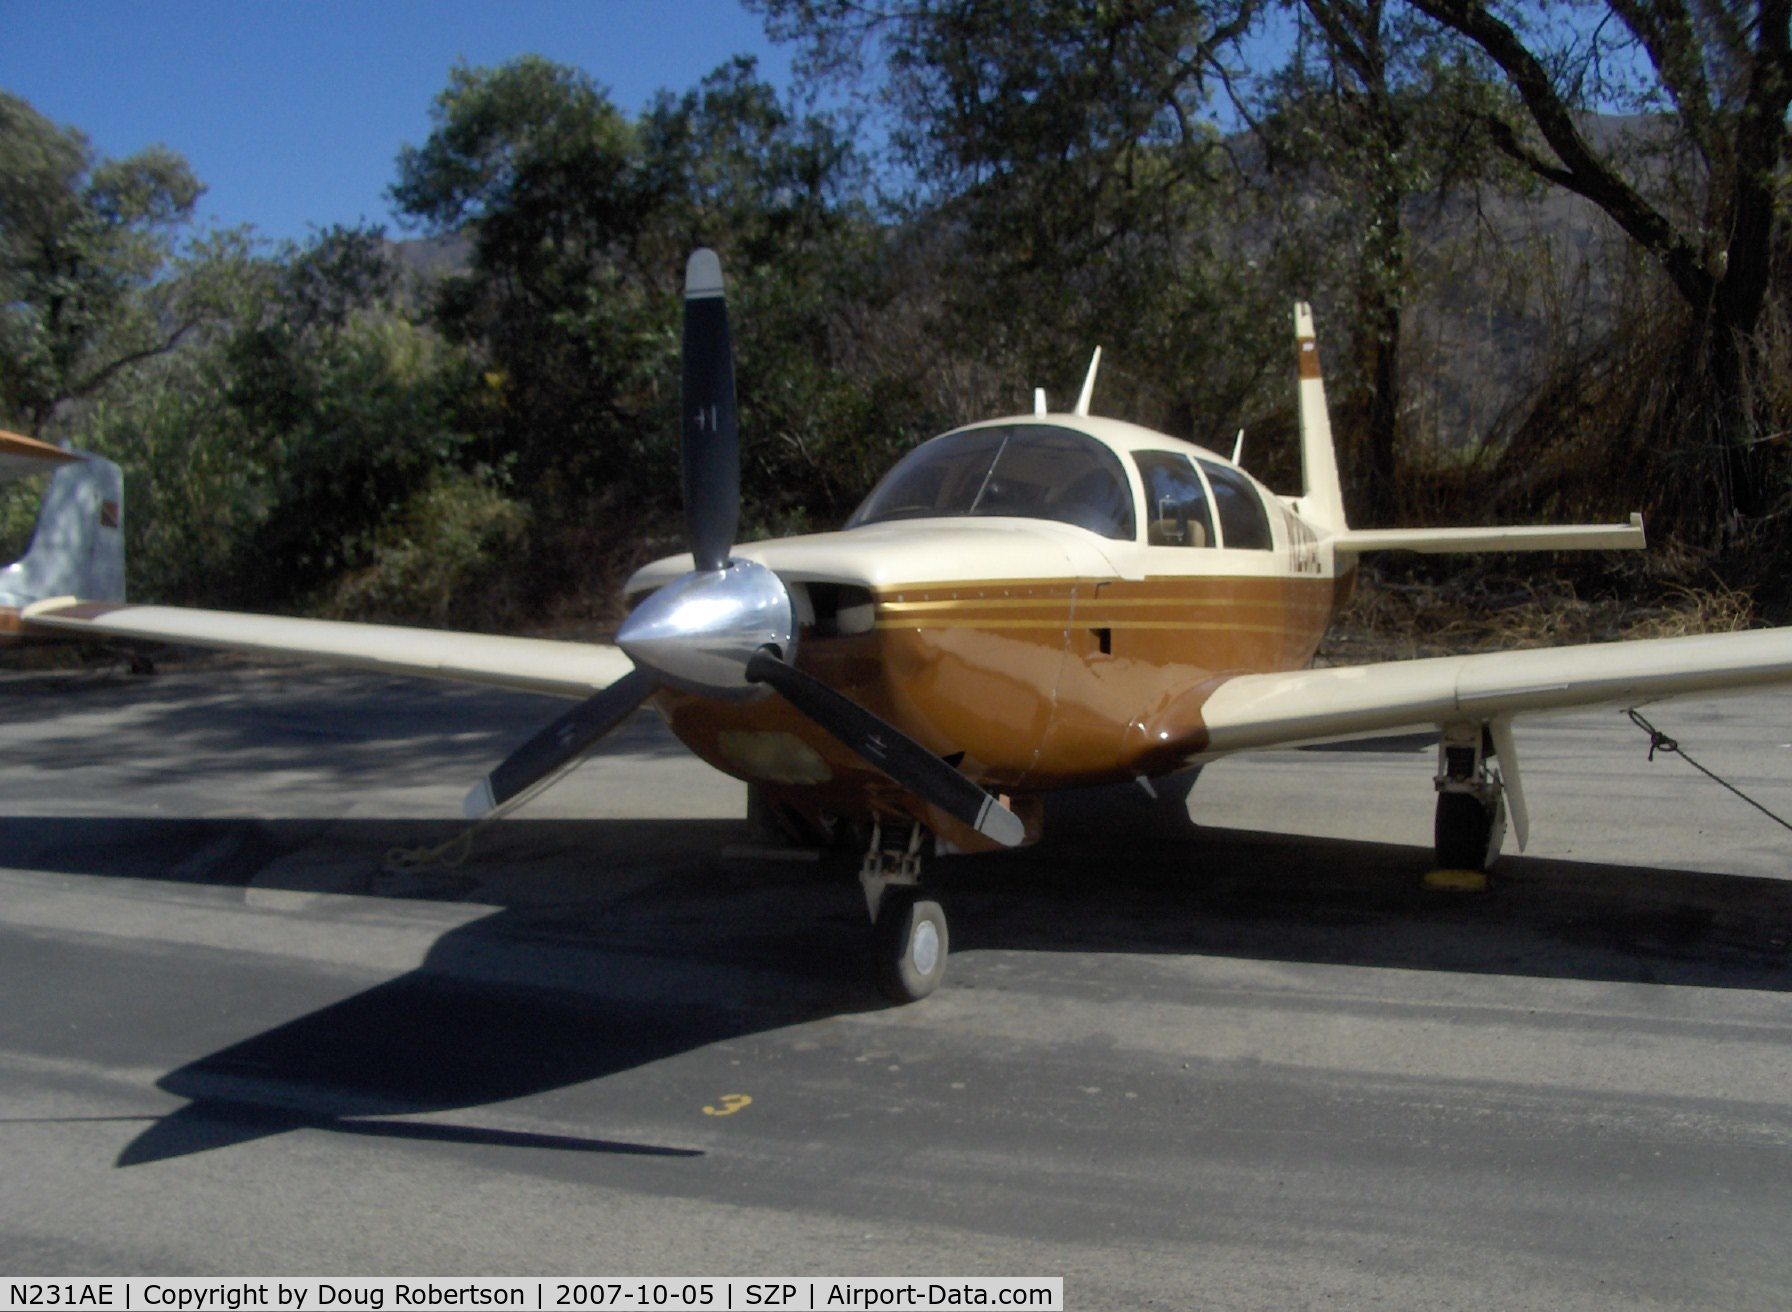 N231AE, 1979 Mooney M20K C/N 25-0054, 1979 Mooney M20K 231 305 Rocket STC conversion to Continental TSIO-520-NB 305 Hp turbocharged engine with new 8 point engine mount with 9 g rating, three-blade McCauley full-feathering prop gives 16/1 glide ratio if engine out